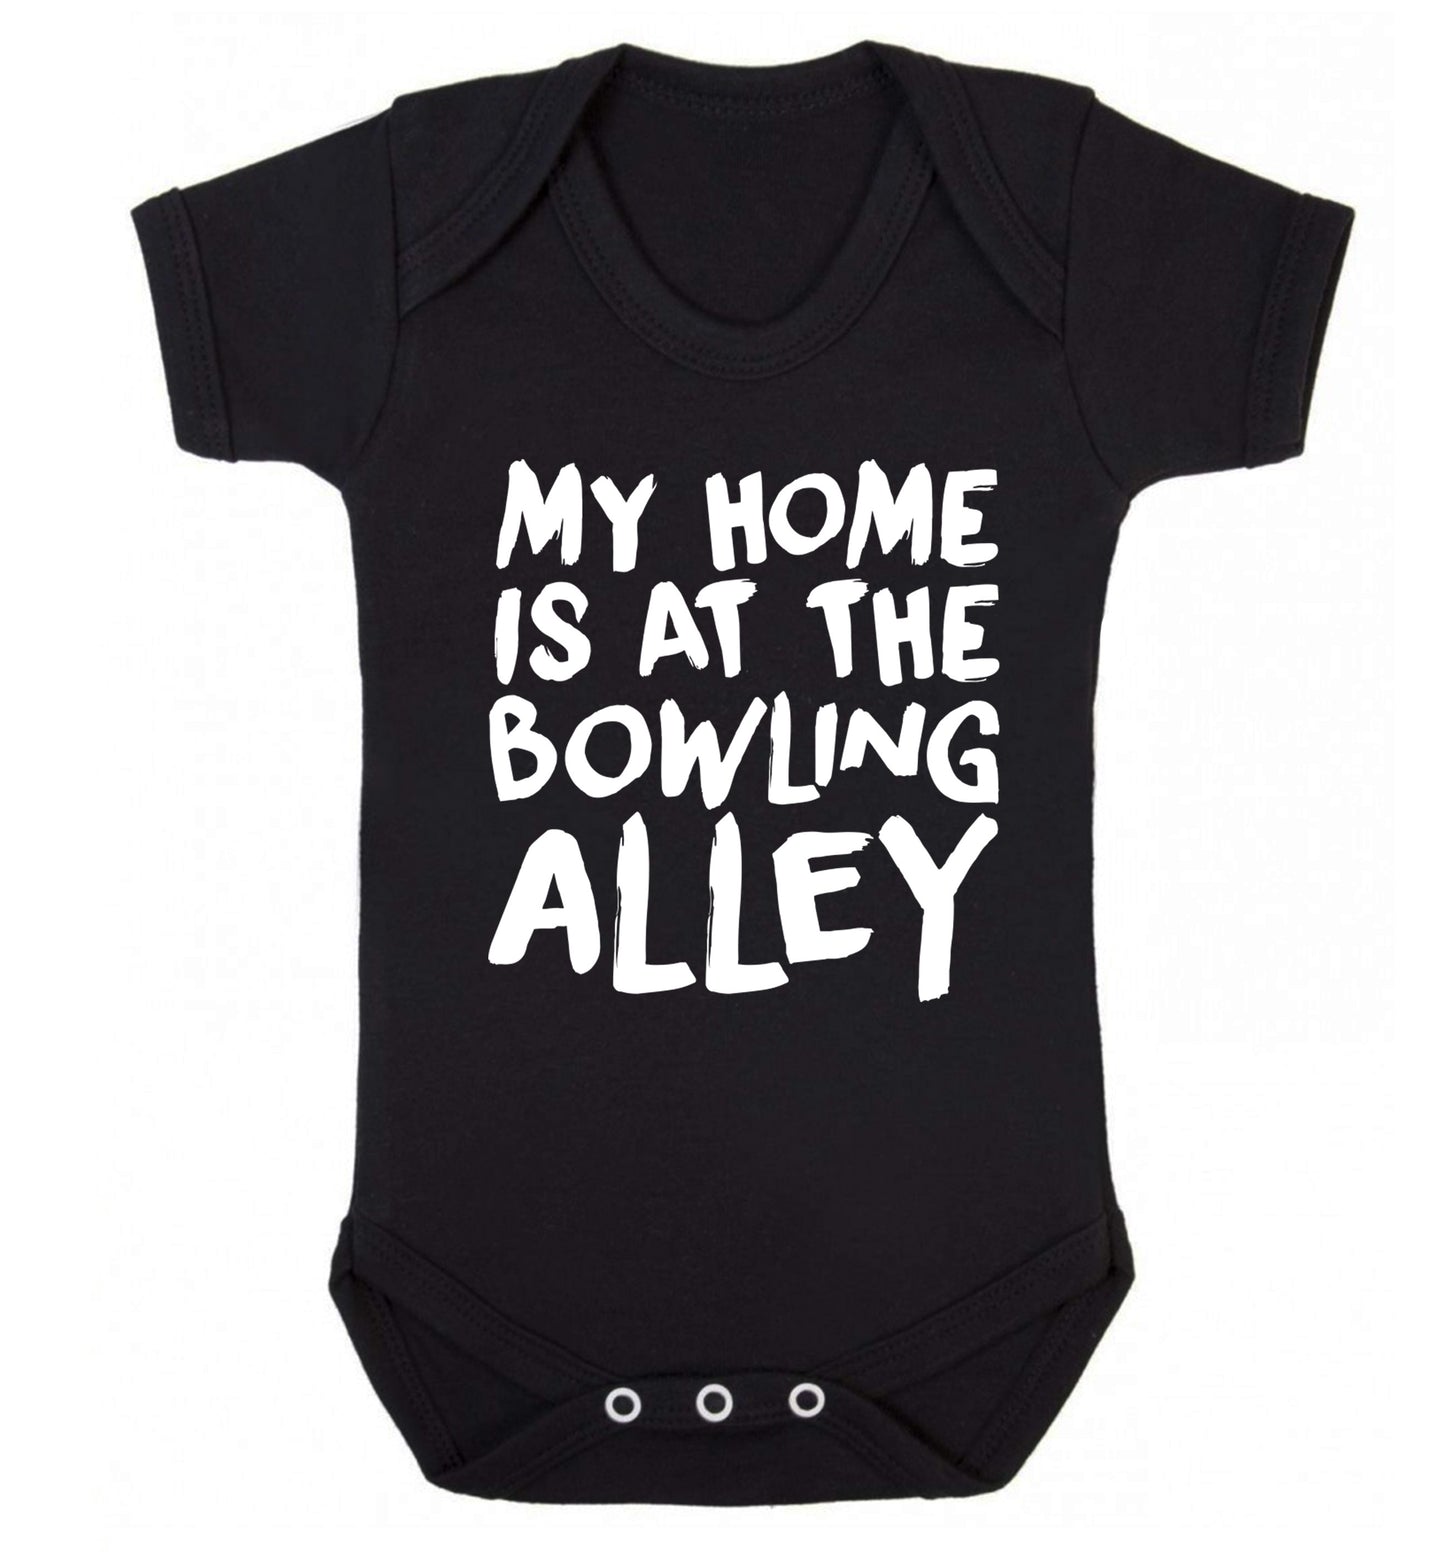 My home is at the bowling alley Baby Vest black 18-24 months